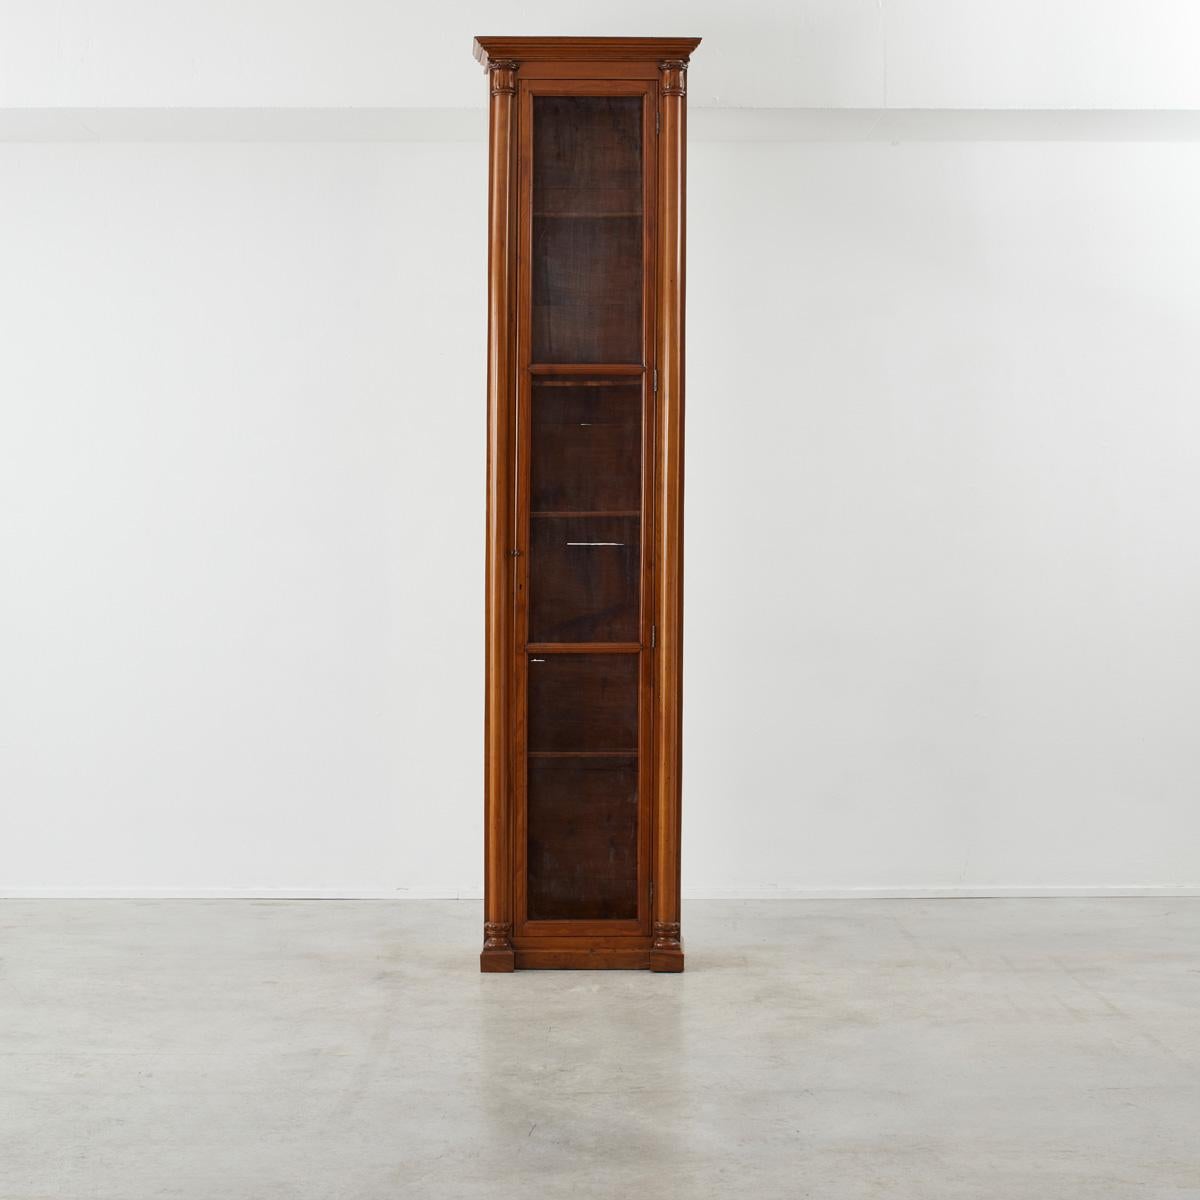 A monumental  towering wooden column bookcase, thought to have been designed for offices of importance in 19th century England. Interchangeable slats allow for the heights of the shelves to be customised to the users need, with a mesh lined door